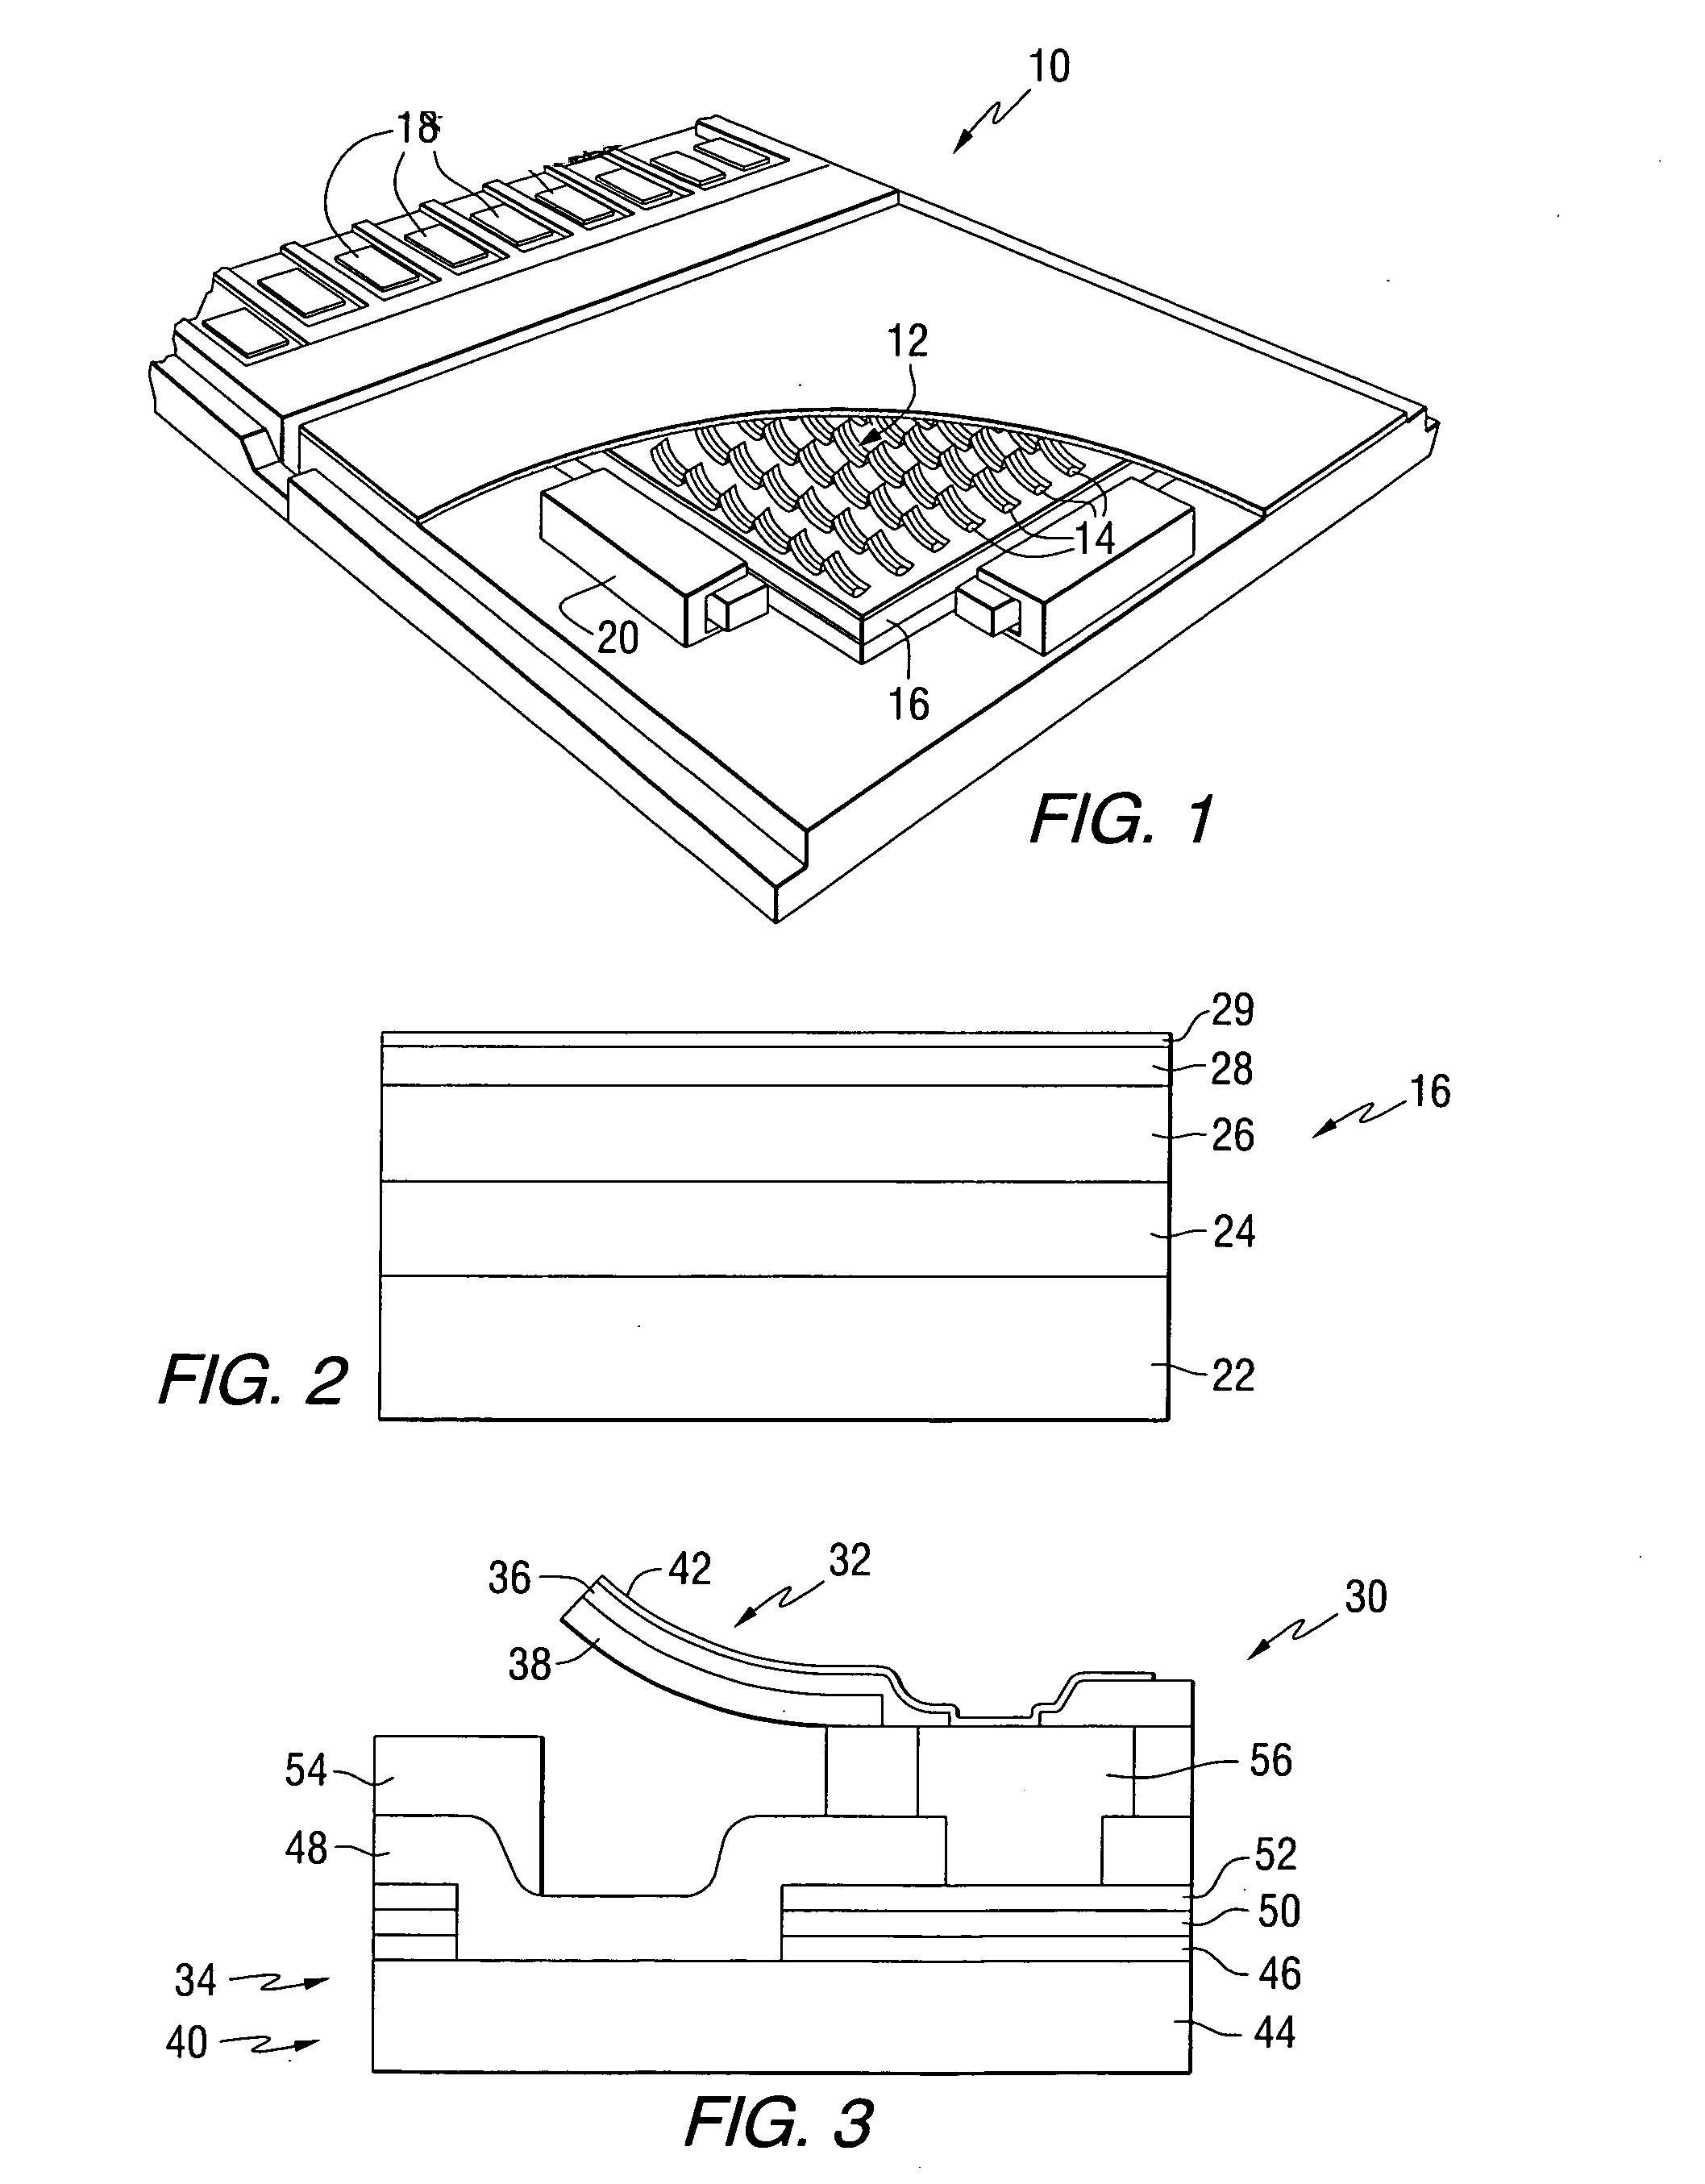 Elevated electrodes for probe position sensing